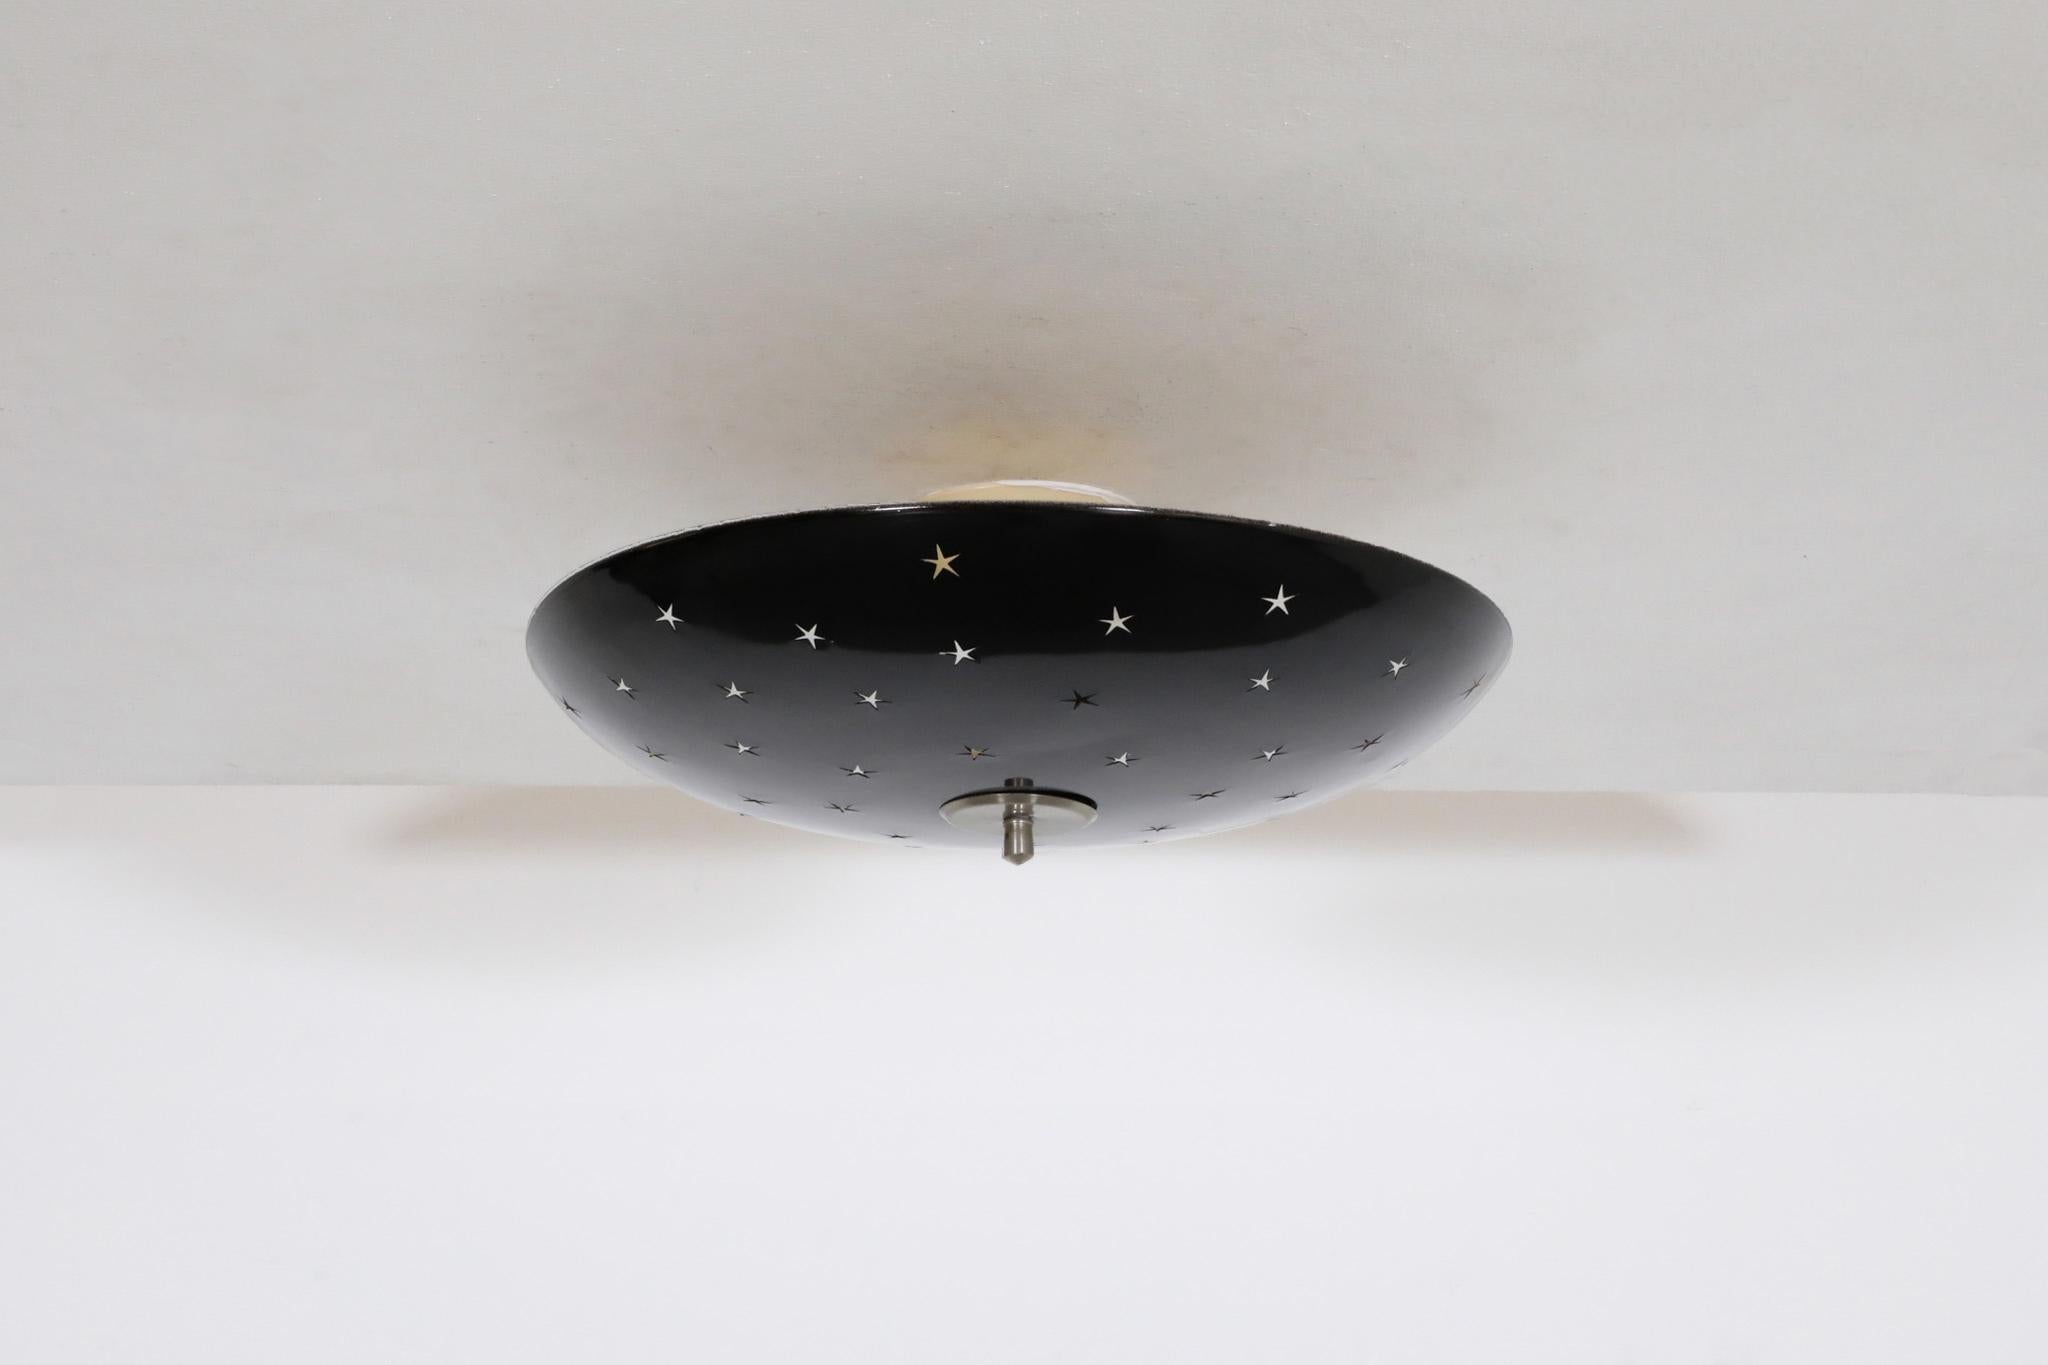 Mid-Century, flush mount, domed, black enameled ceiling light with retro star cutouts. The dome is in good condition with wear consistent with its age and use. The fitting hardware may not be original, the bullet shaped canopy is original and is